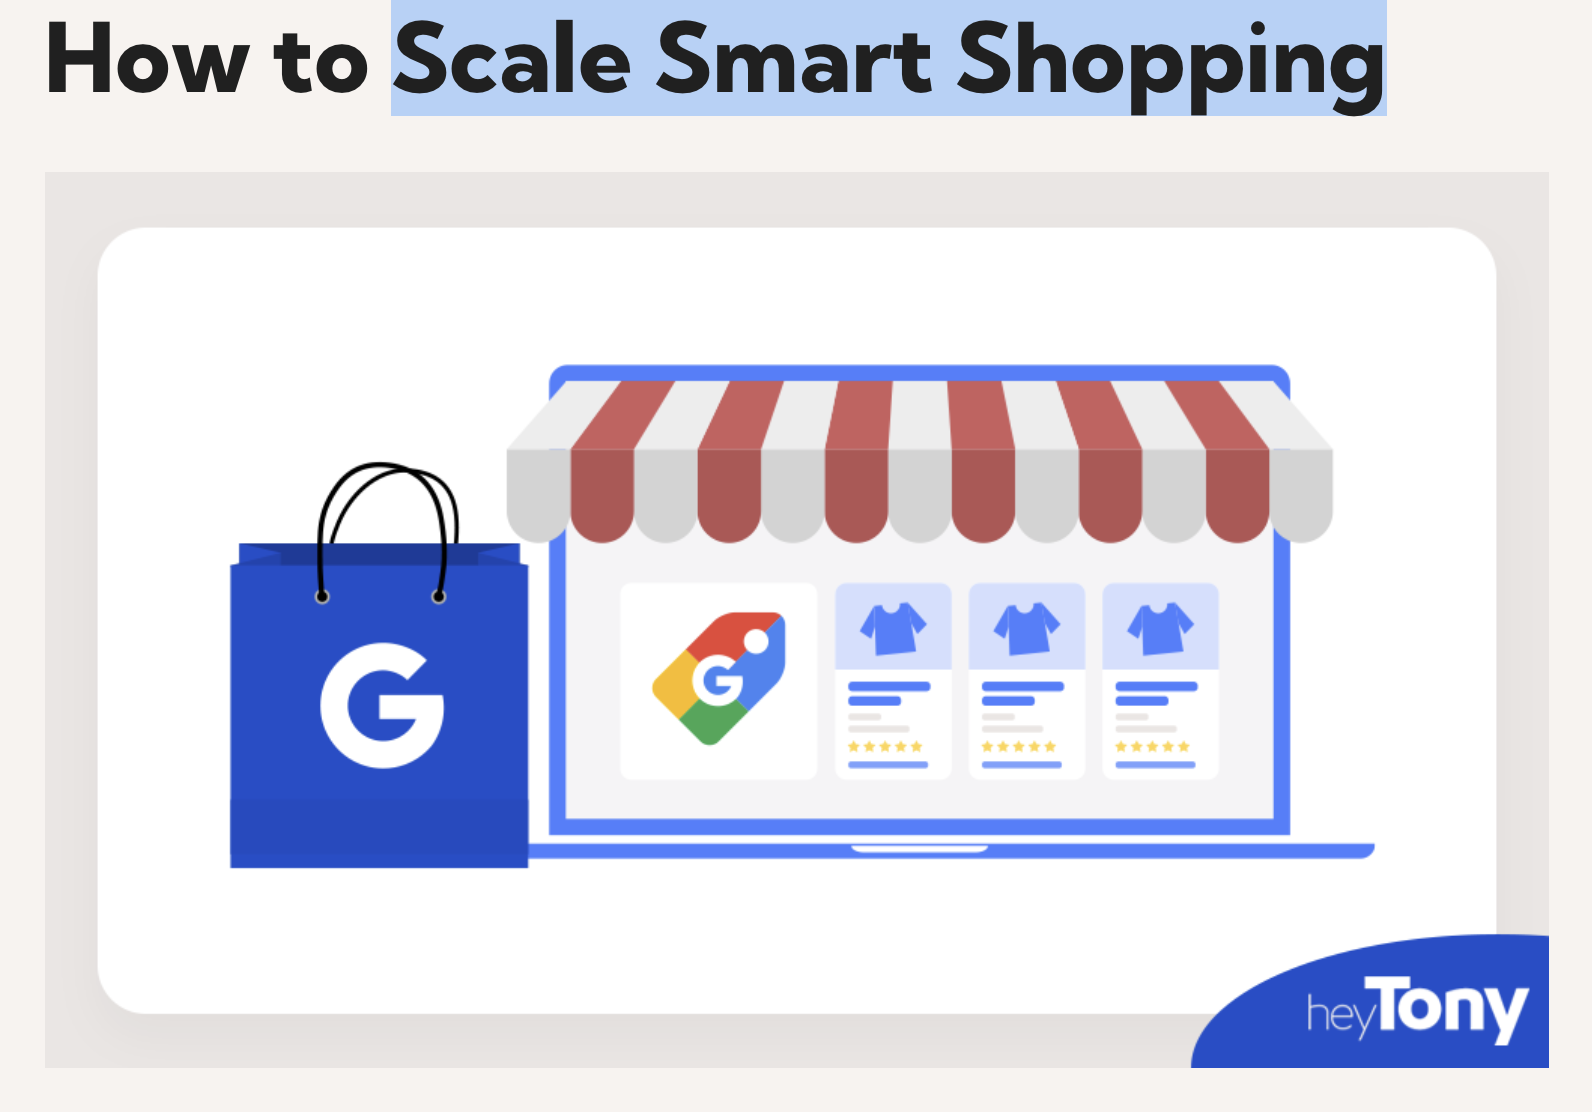 How to Scale Smart Shopping